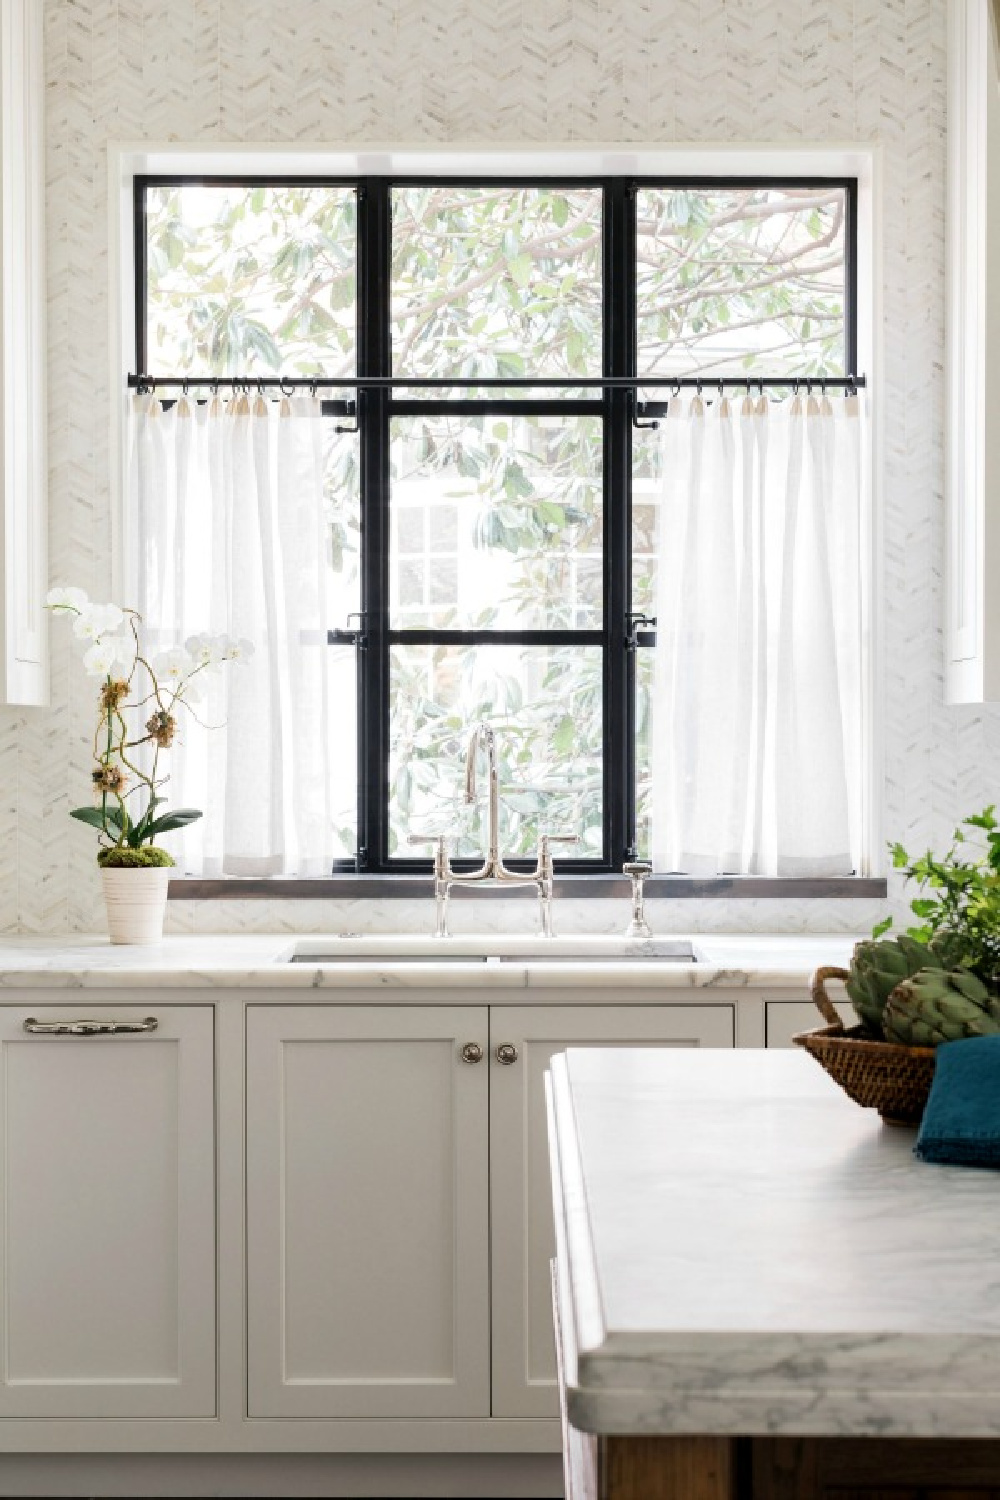 Black And White Kitchens: A Timeless Trend That Serves Every Style!